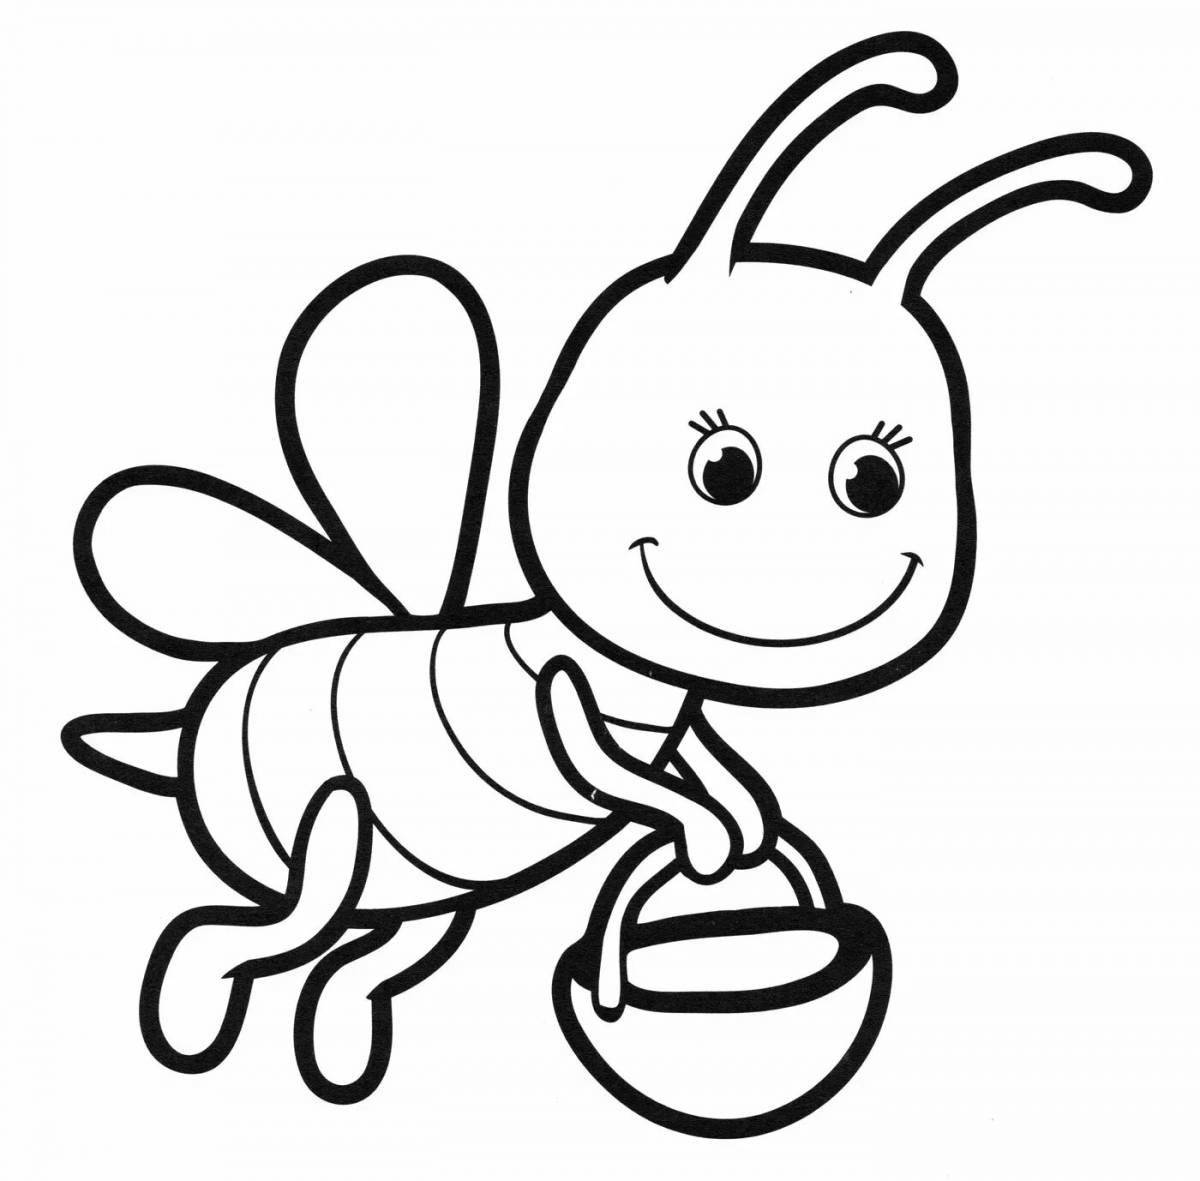 Outstanding bee coloring book for 6-7 year olds